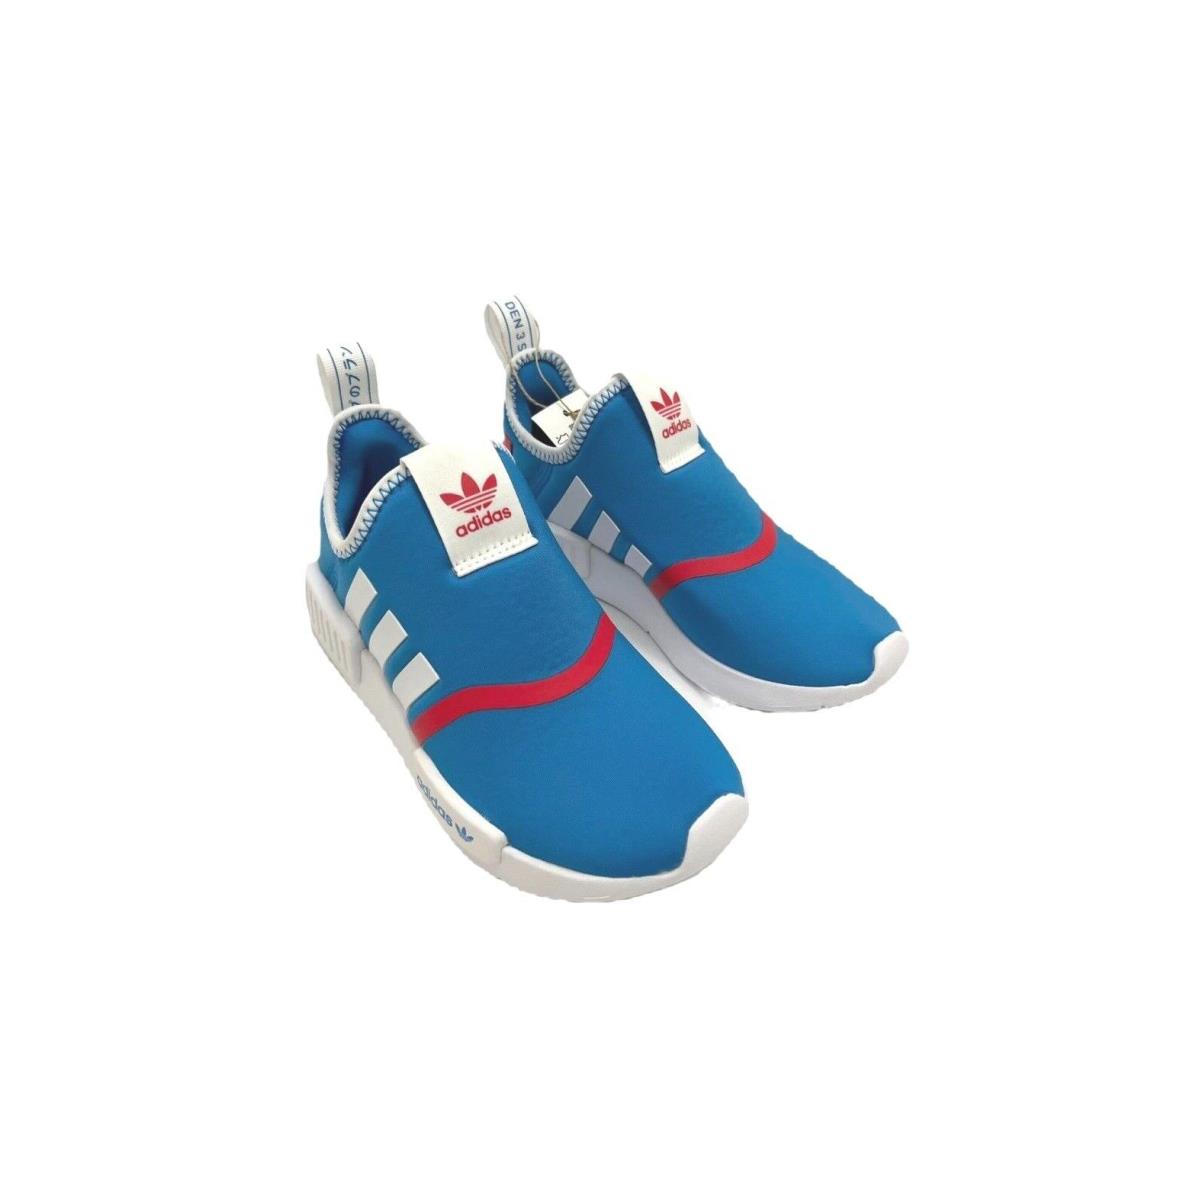 Adidas Toddler Nmd 360 Shoes GY 9157 - Blue Rush/Cloud White/Vivid Red